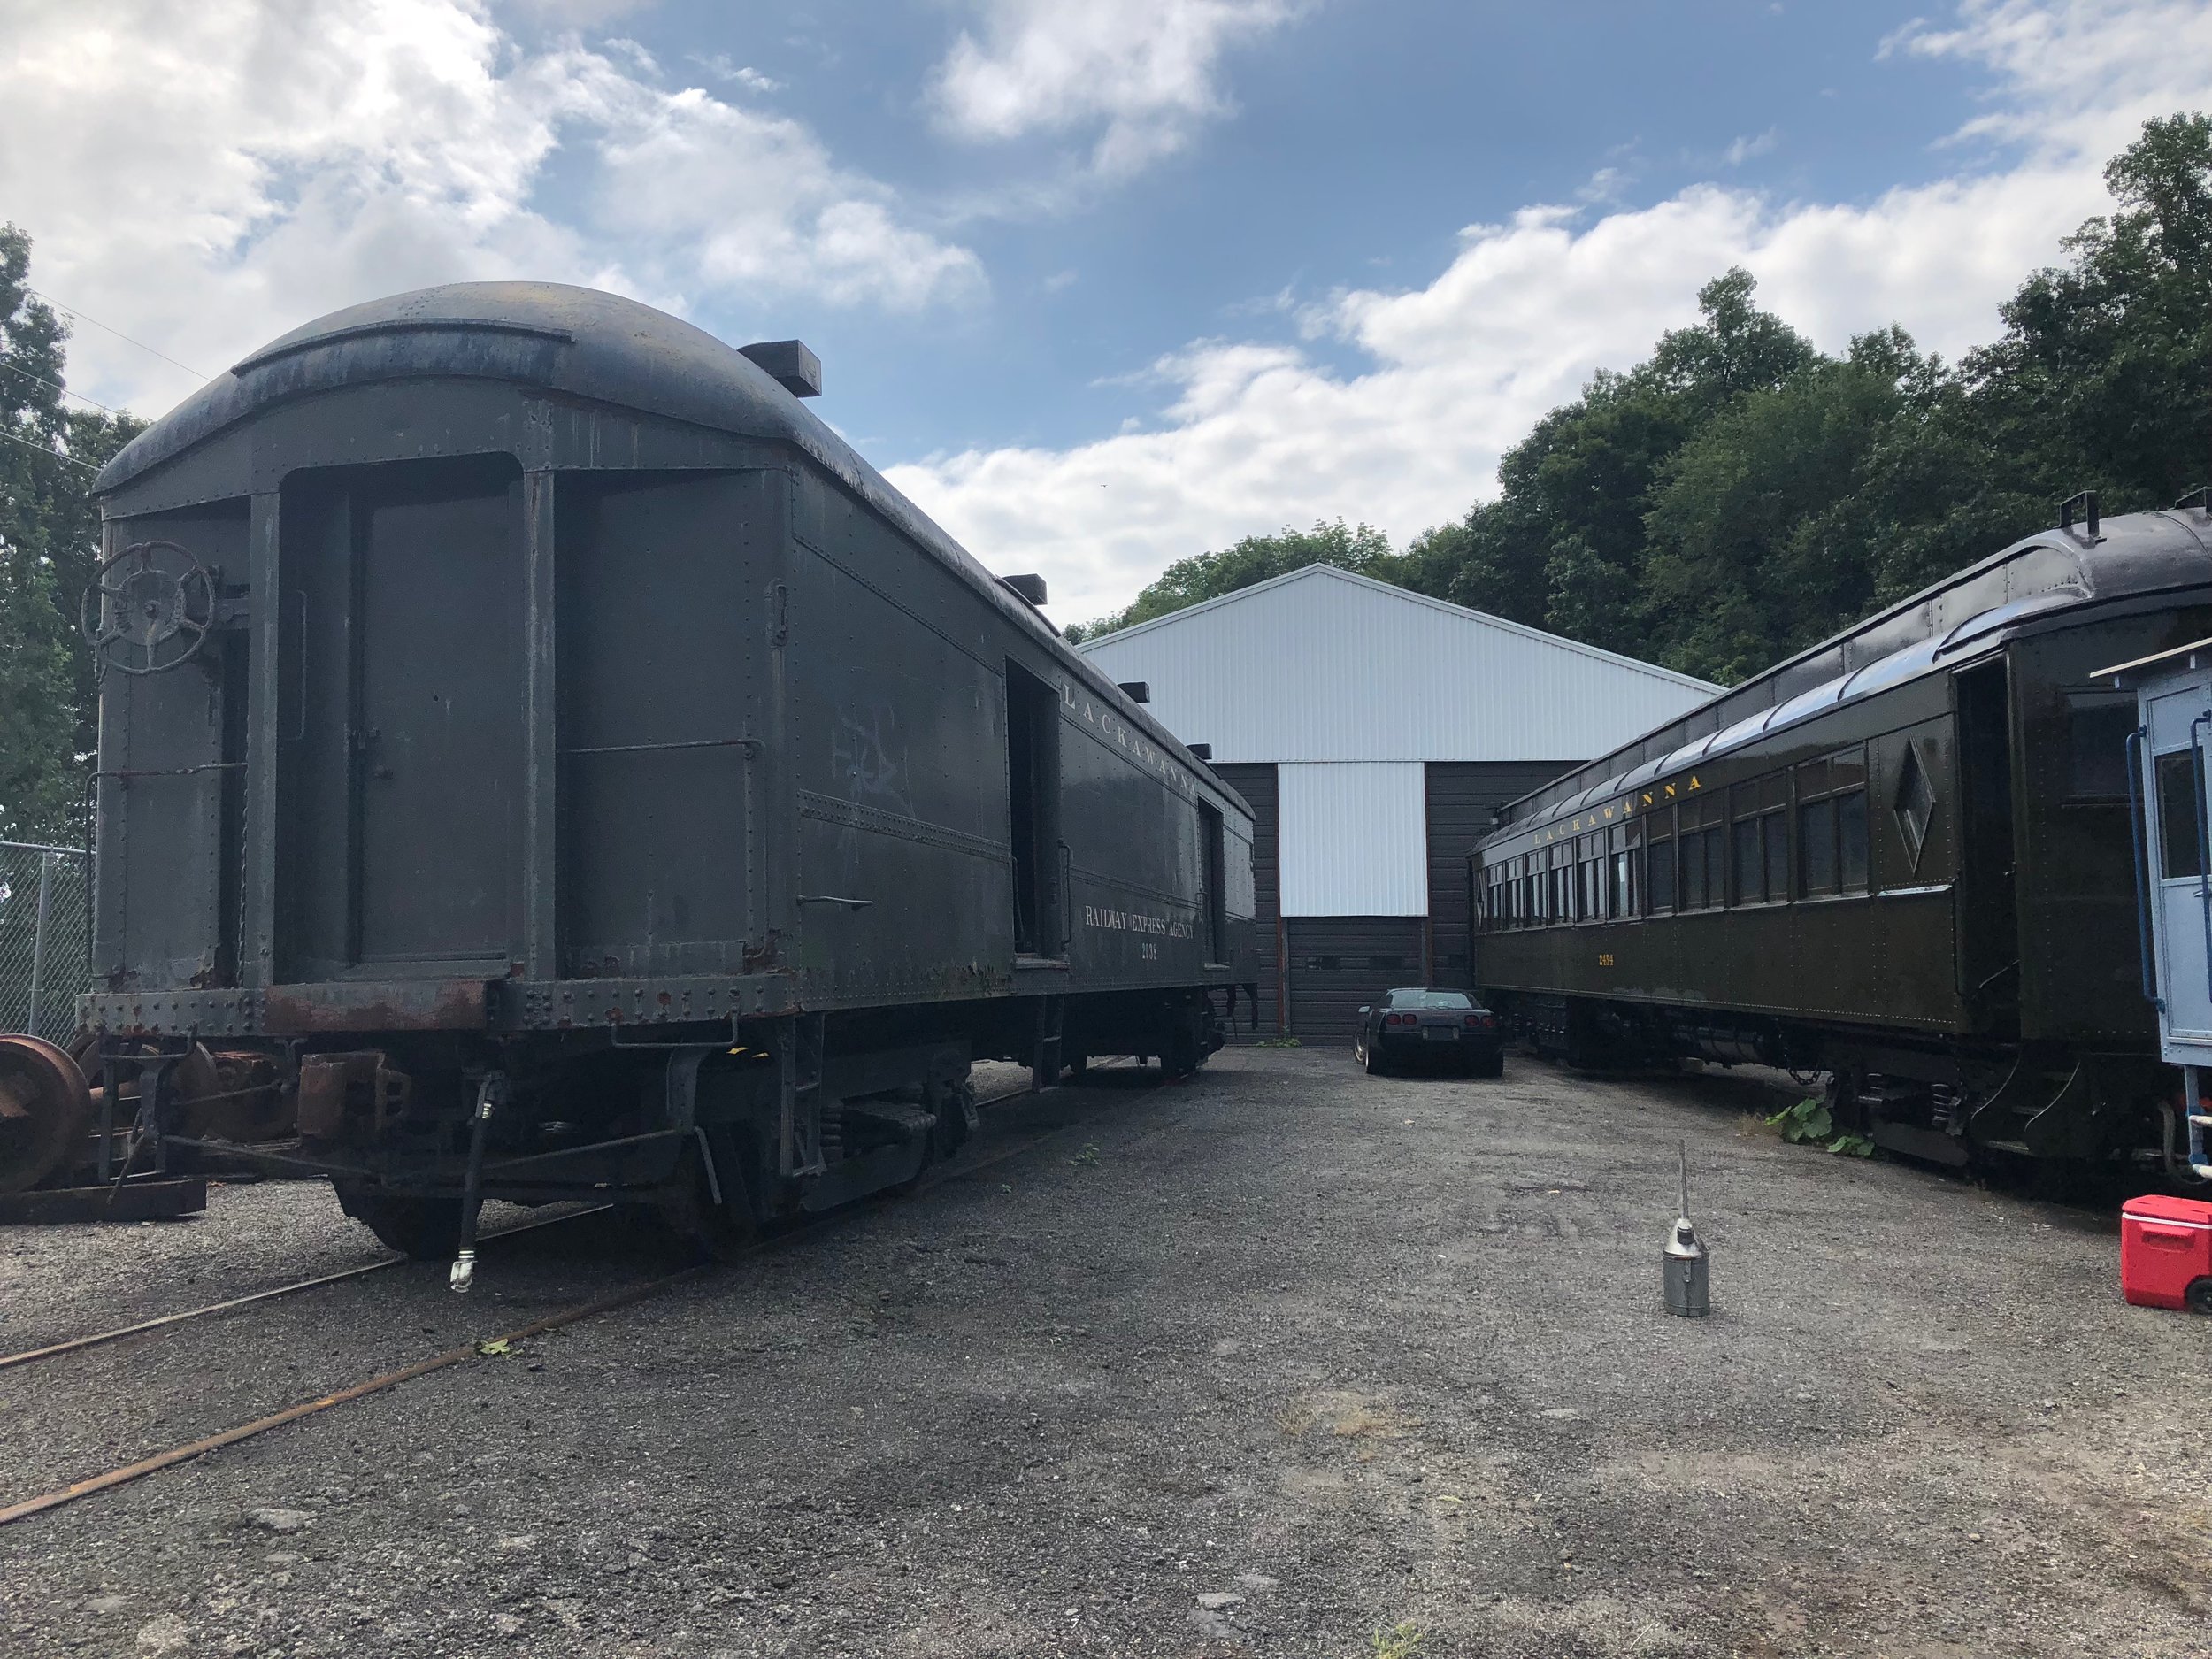  The DL&amp;W baggage car was parked next to the Whippany Railway Museum’s DL&amp;W MU subscription car in Boonton Yard. 